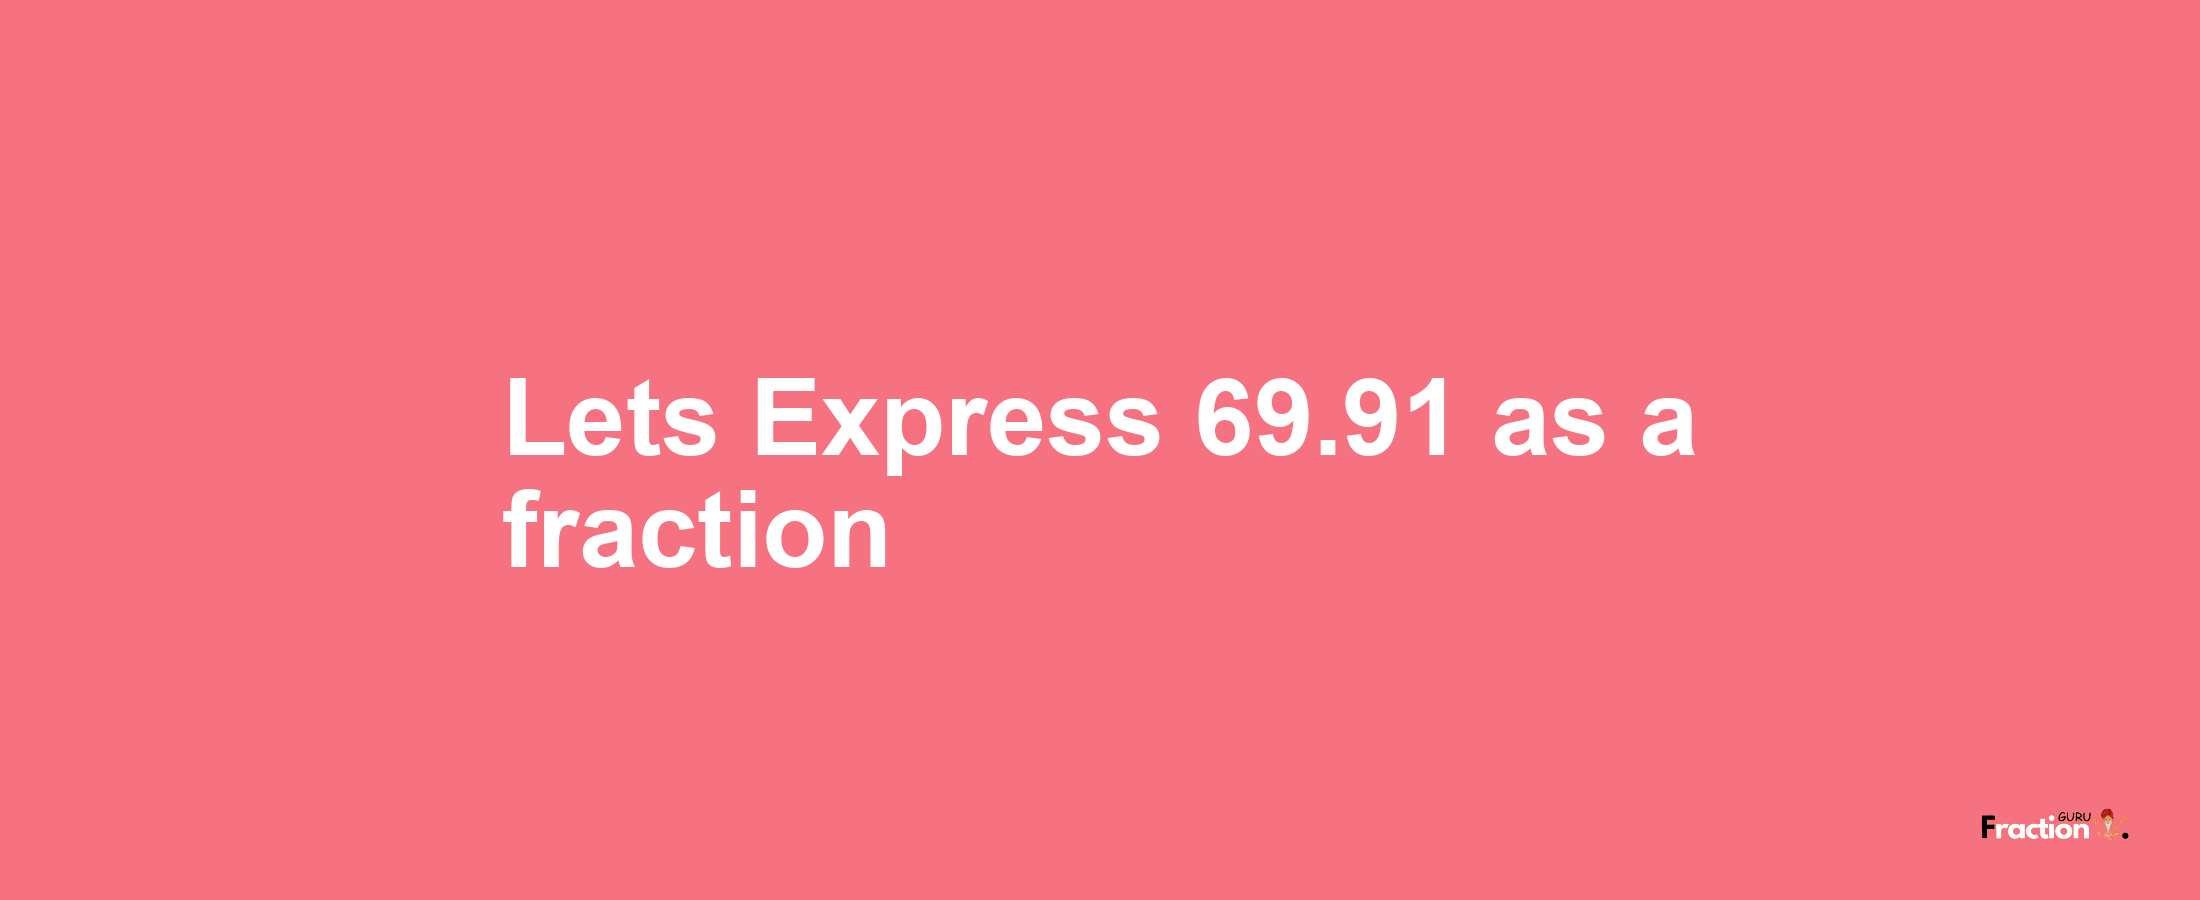 Lets Express 69.91 as afraction